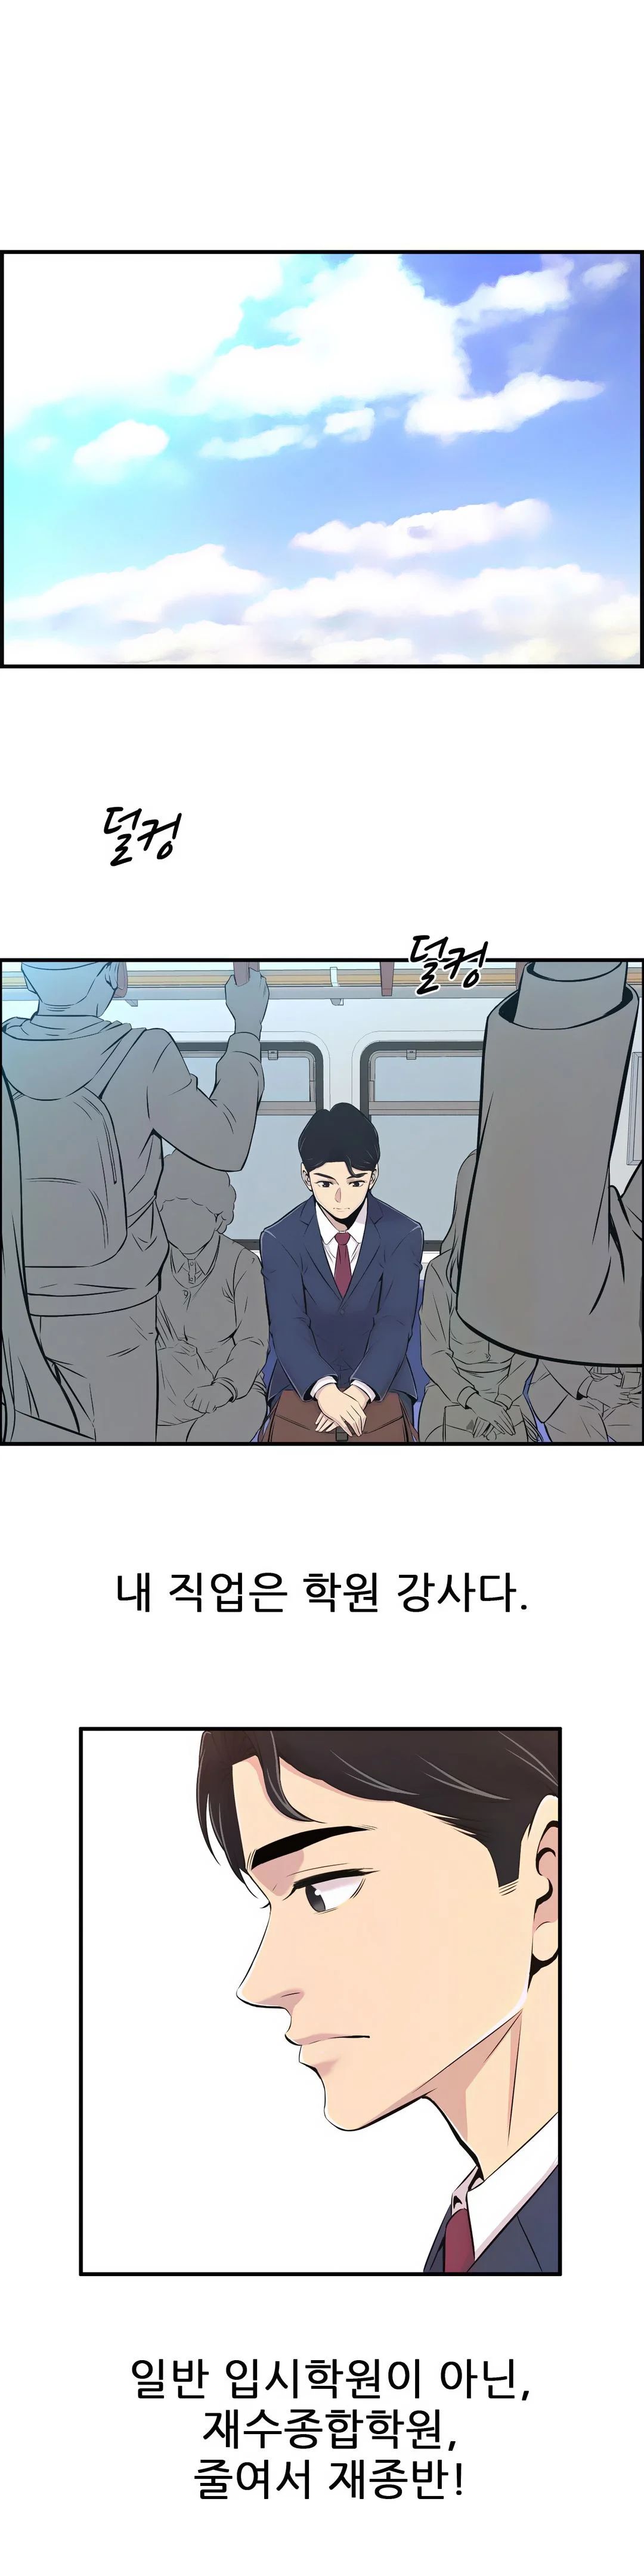 Cram School Scandal Raw - Chapter 1 Page 2